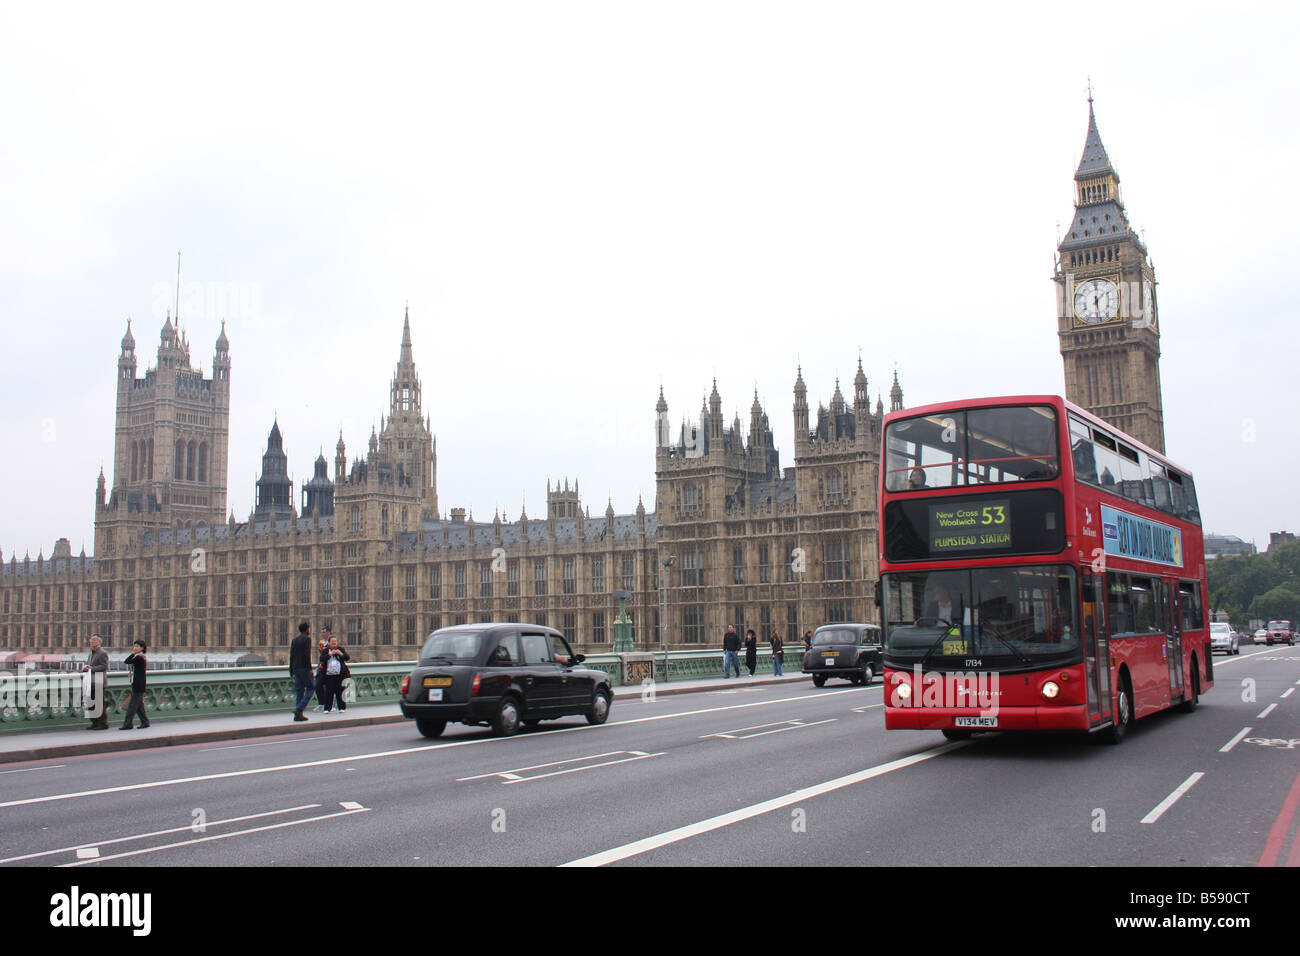 A London bus crosses the River Thames in front of Big Ben London ...